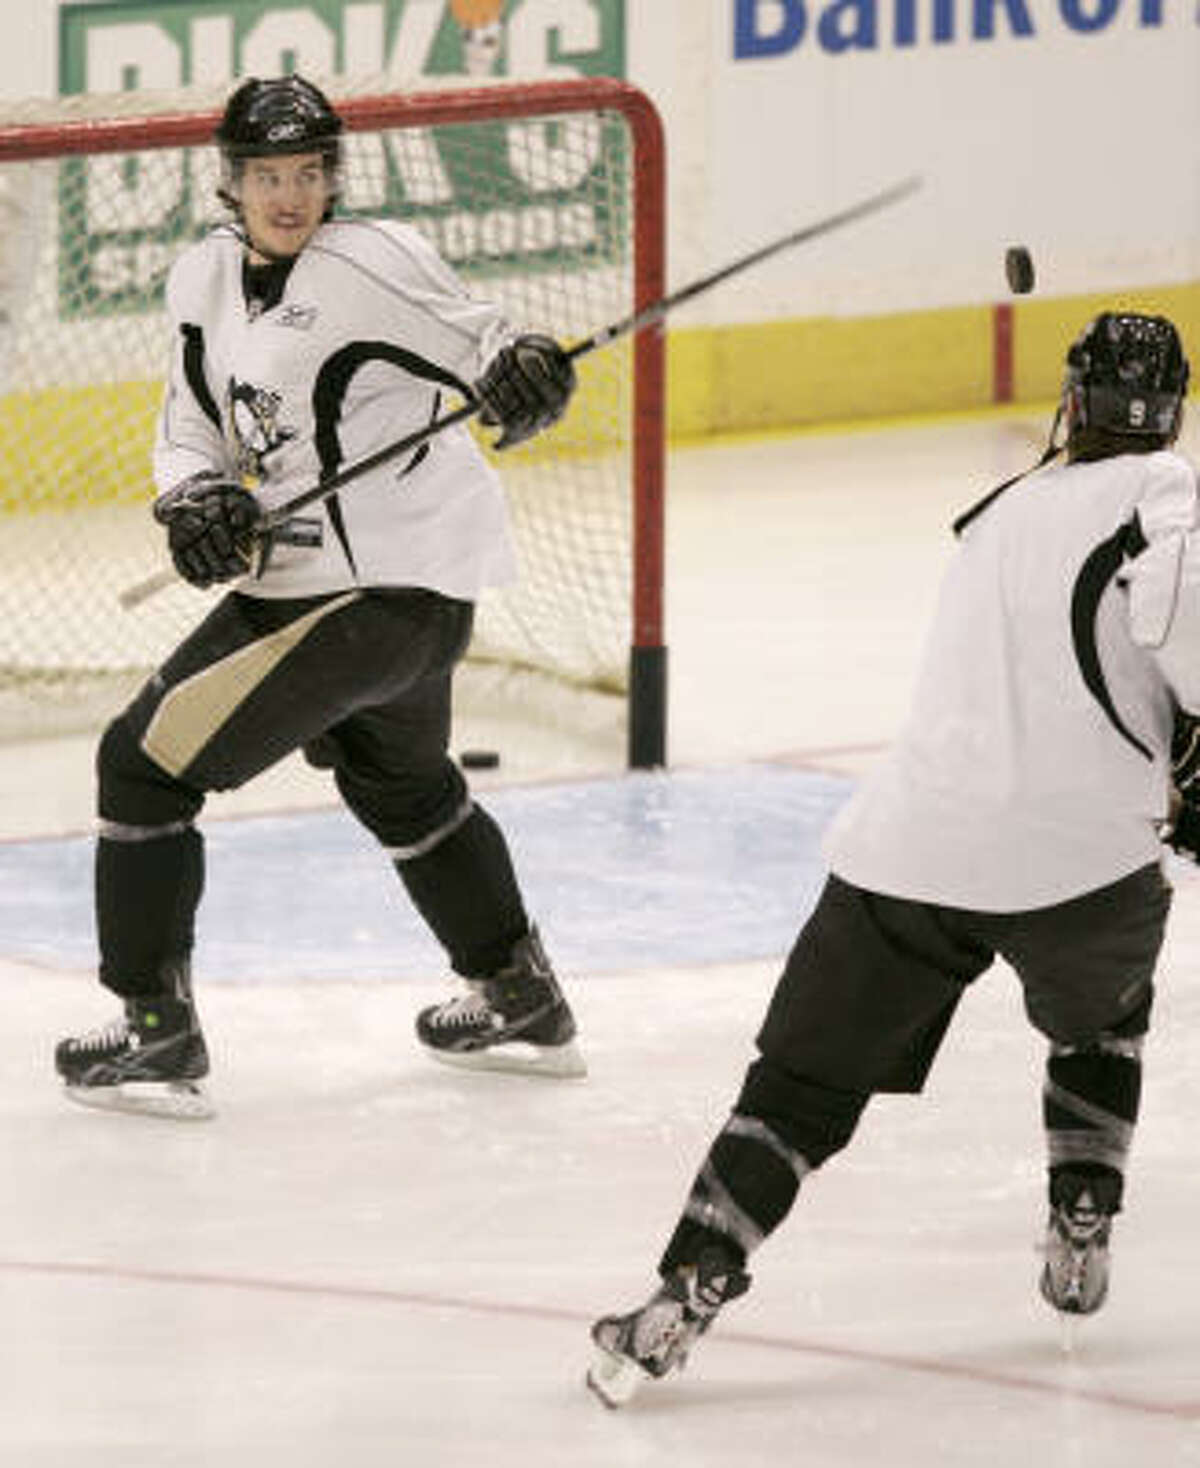 Pittsburgh Penguins' Sidney Crosby,left, swats at a puck flipped up by teammat Pascal Dupuis as the two warm up before practice in Pittsburgh, on Wednesday. The Penguins face the Detroit Red Wings in the Stanley Cup Finals first game on Saturday in Detroit.